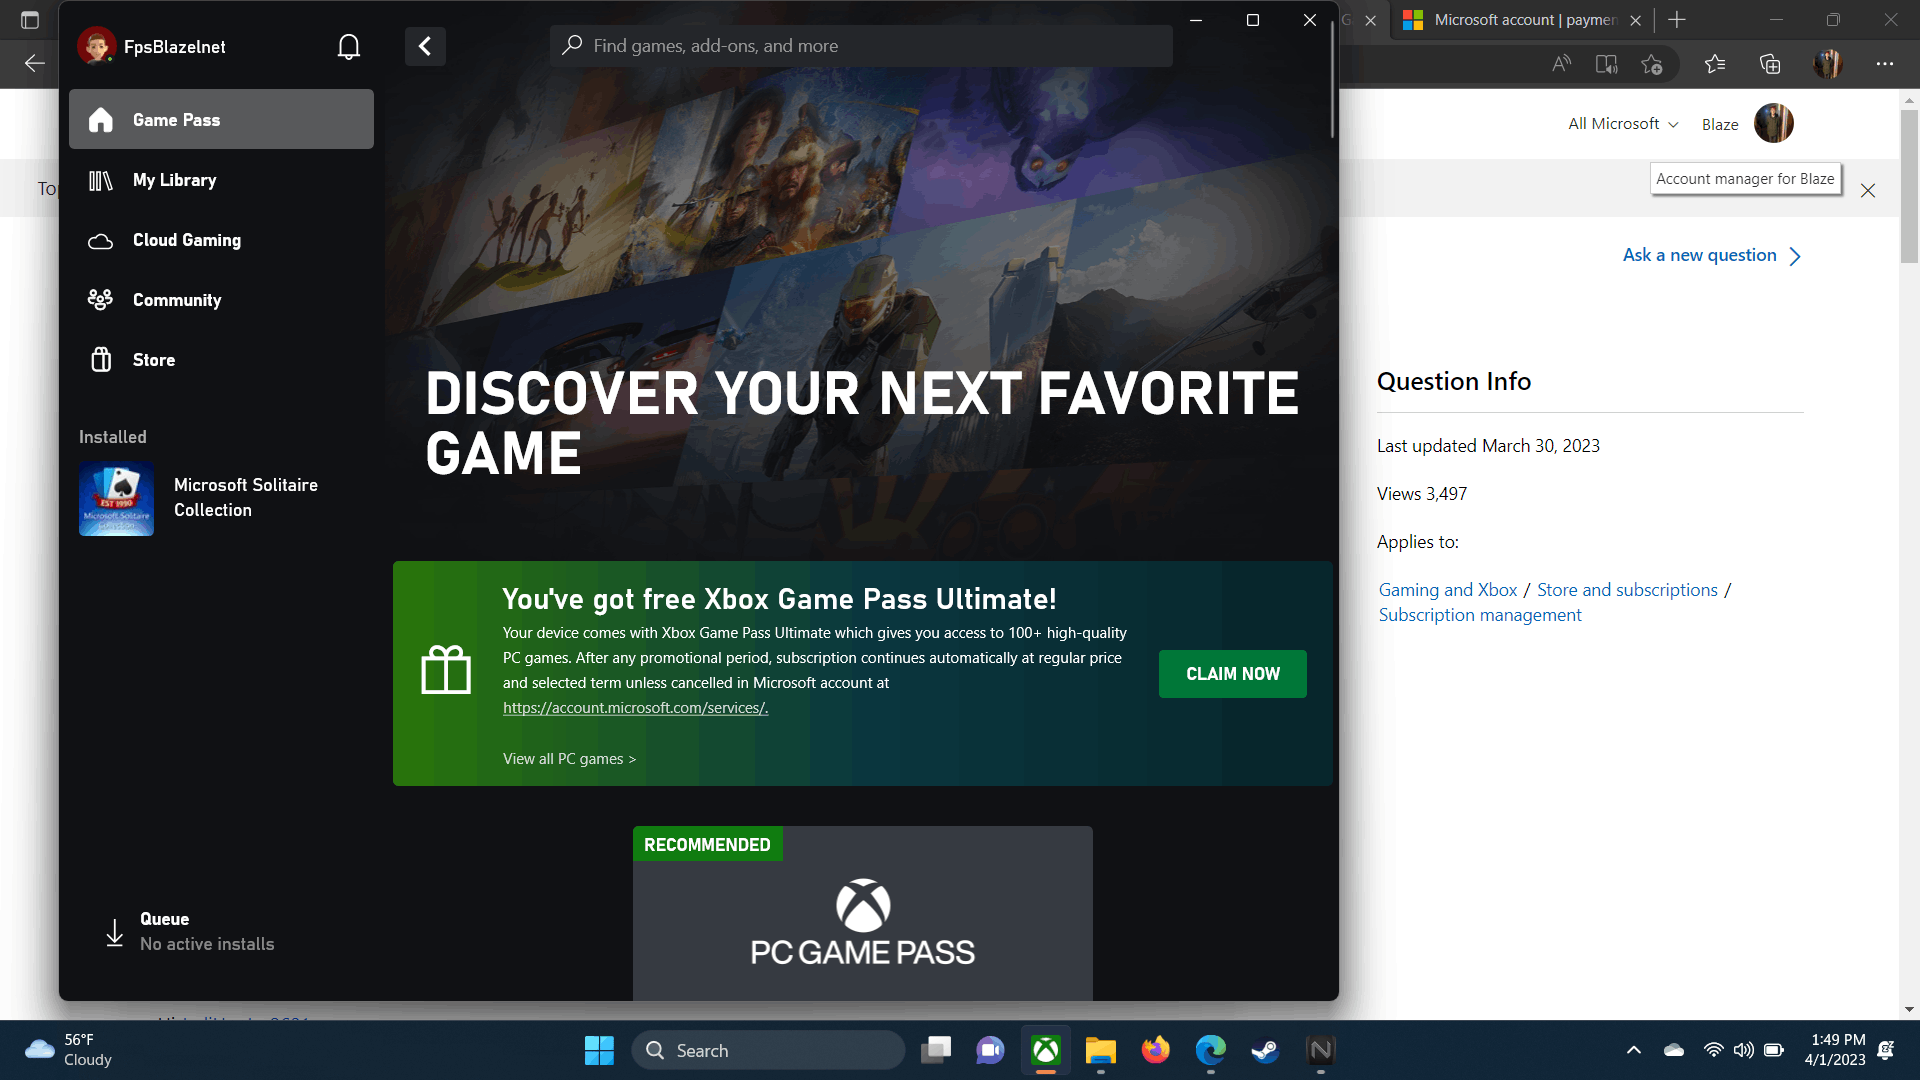 Cloud gaming options no longer showing/working with ultimate subscription  on PC. : r/XboxGamePass